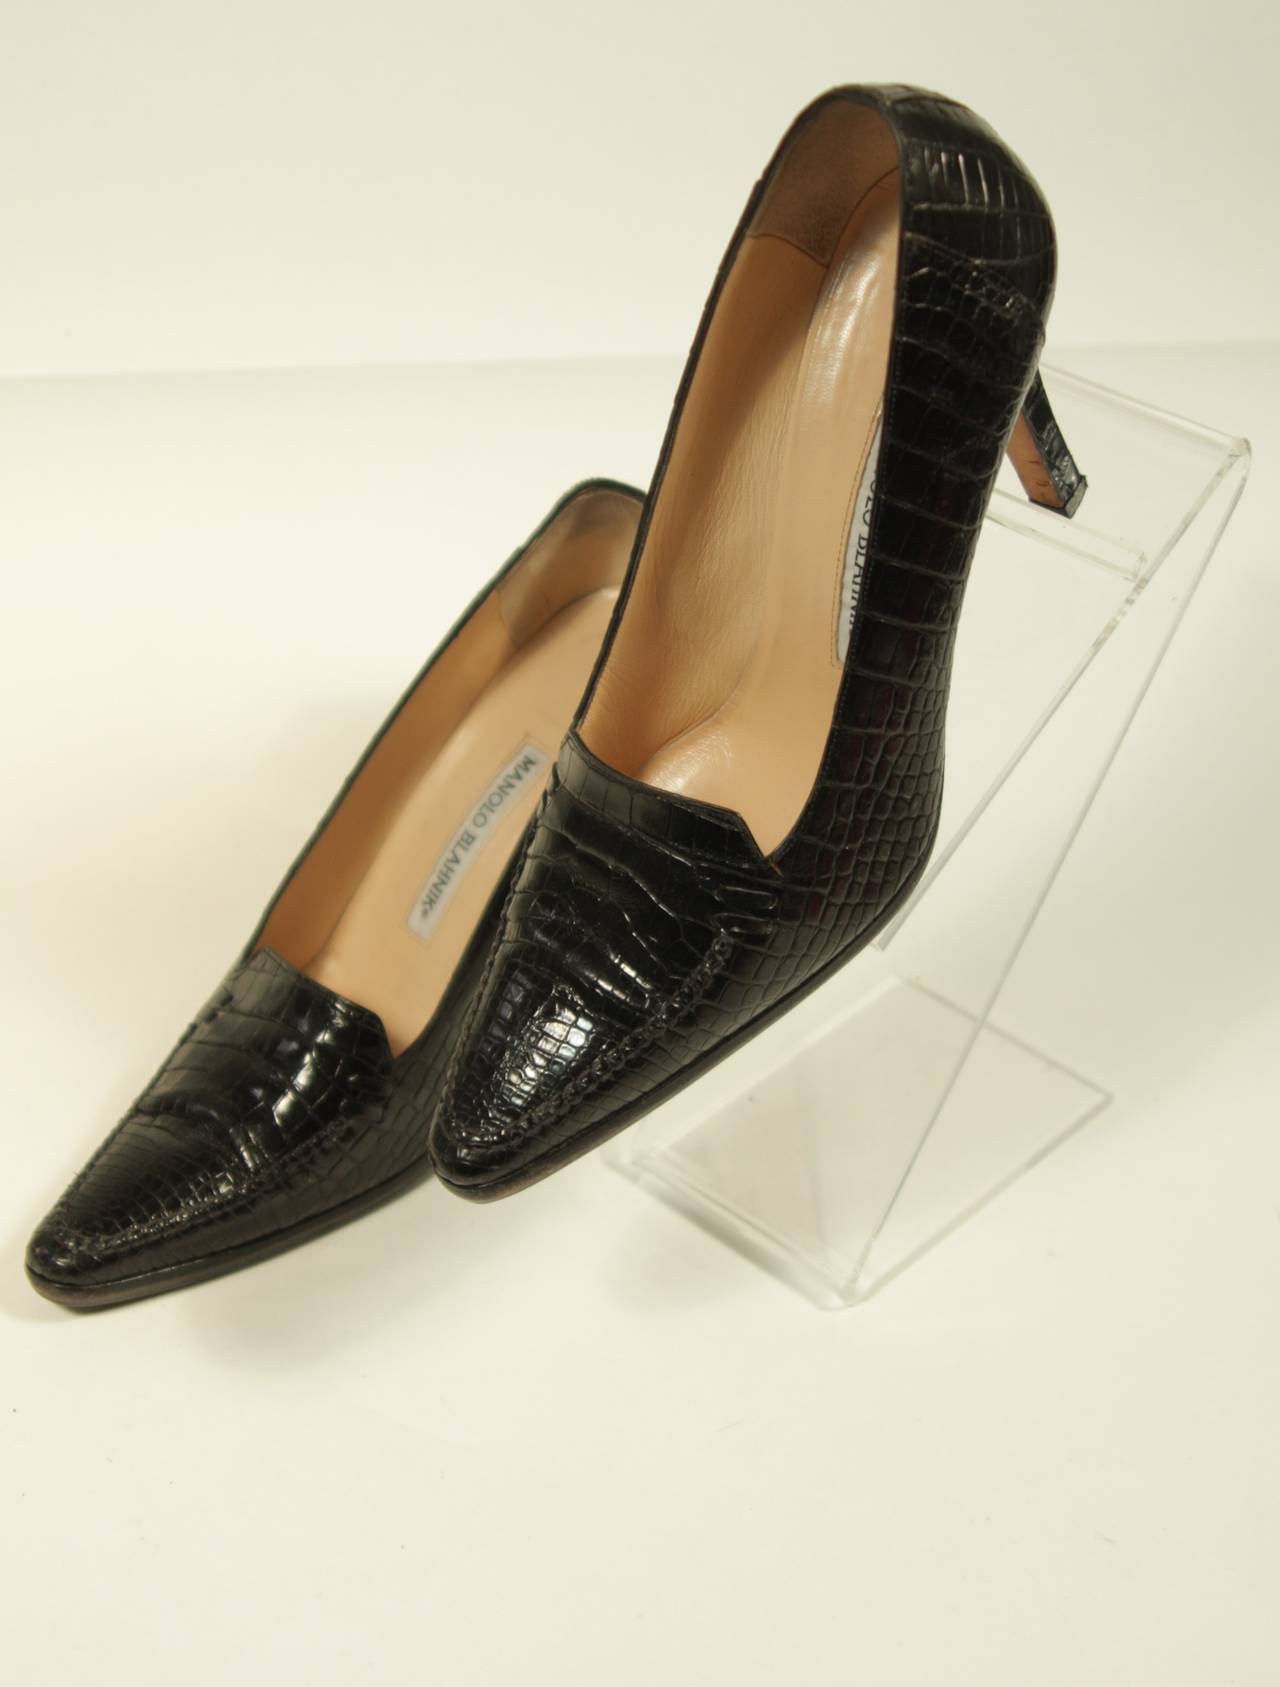 These Manolo Blahnik  black crocodile heels are in excellent condition and have been resoled with a sole providing more traction and comfort. Made in Italy. 

Measures (Approximately)
Size 38
Interior length: 10